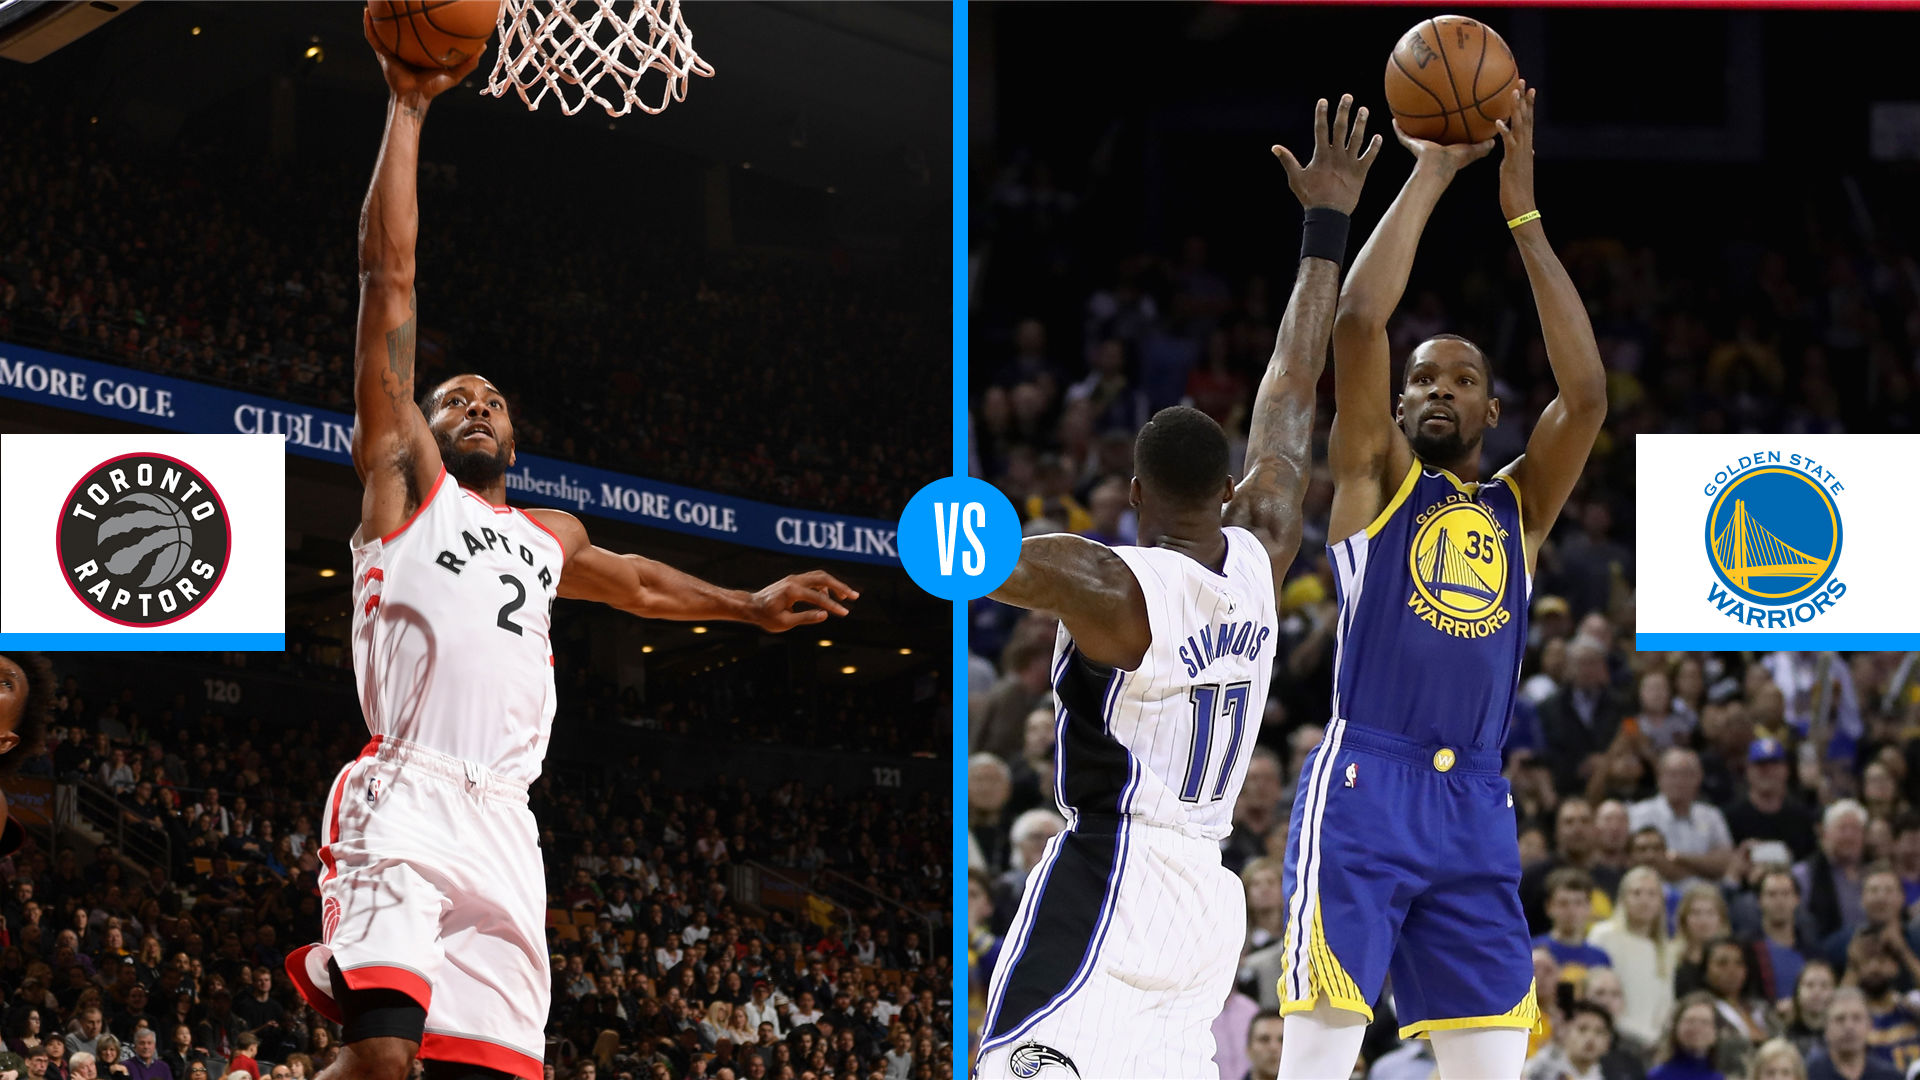 Toronto Raptors vs. Golden State Warriors: Game preview, live stream, TV channel ...1920 x 1080